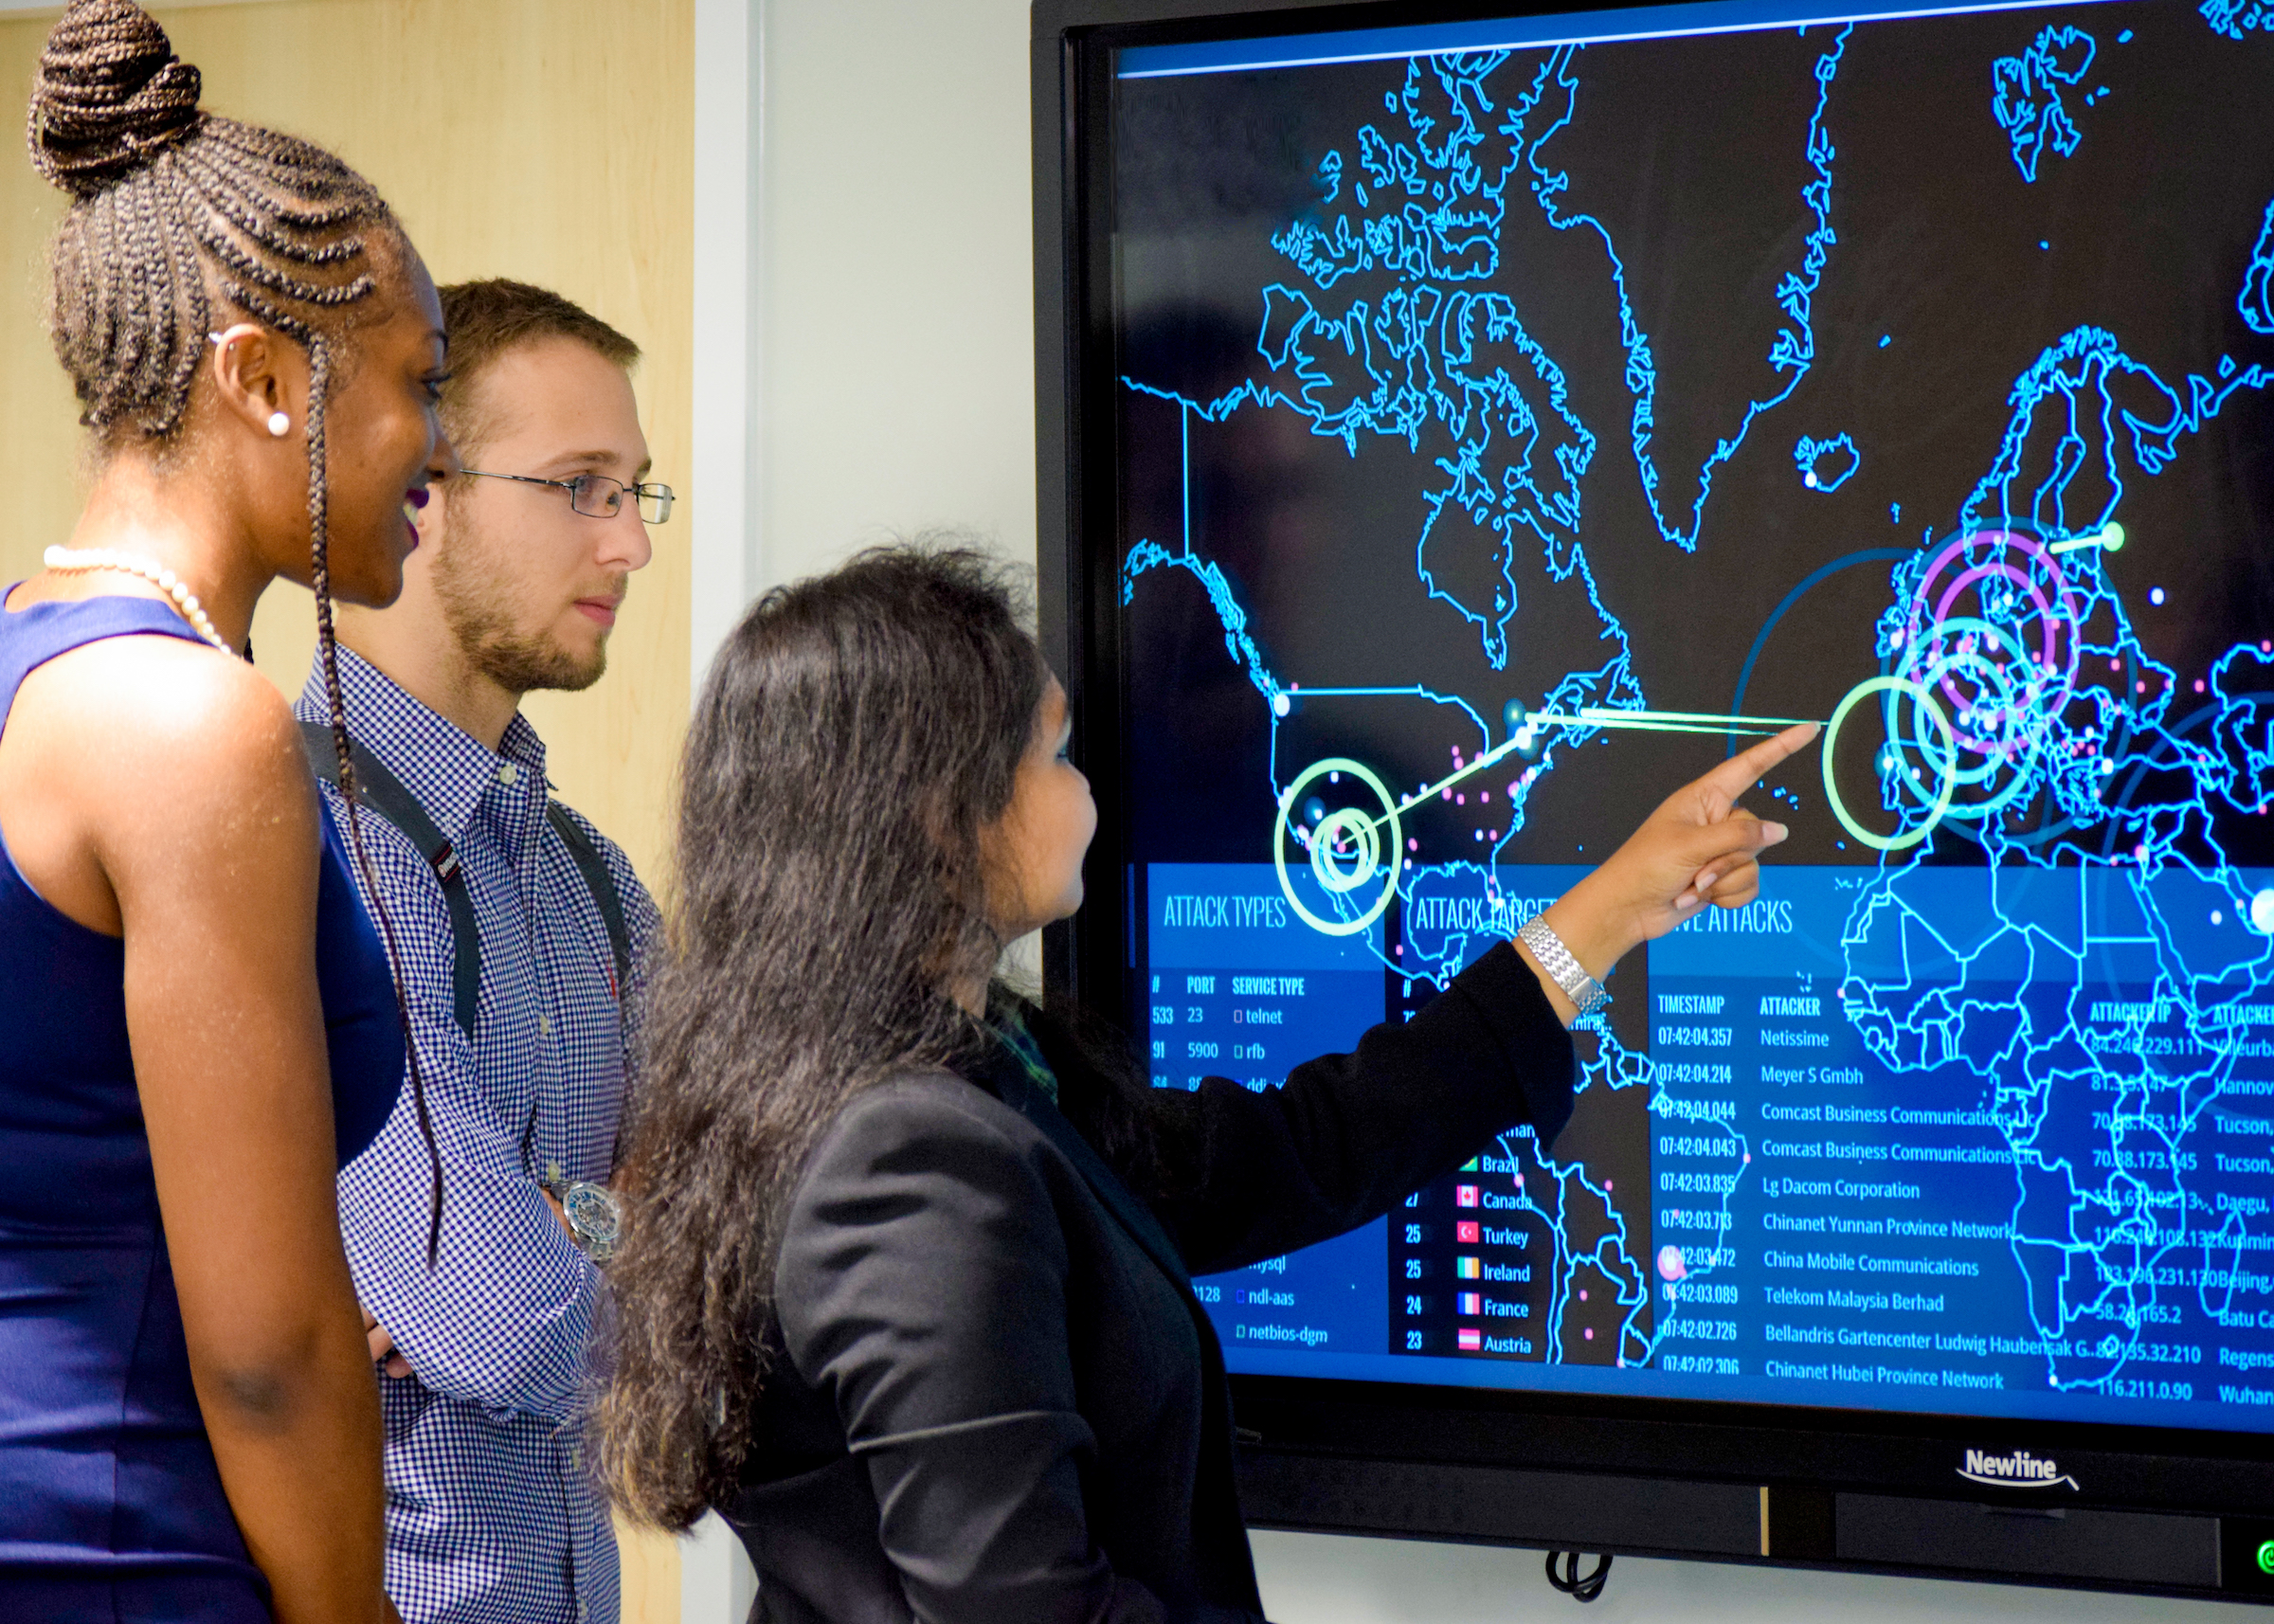 Three students stand next to a large monitor showing a cyber attack map of the world. One student is pointing to the map.